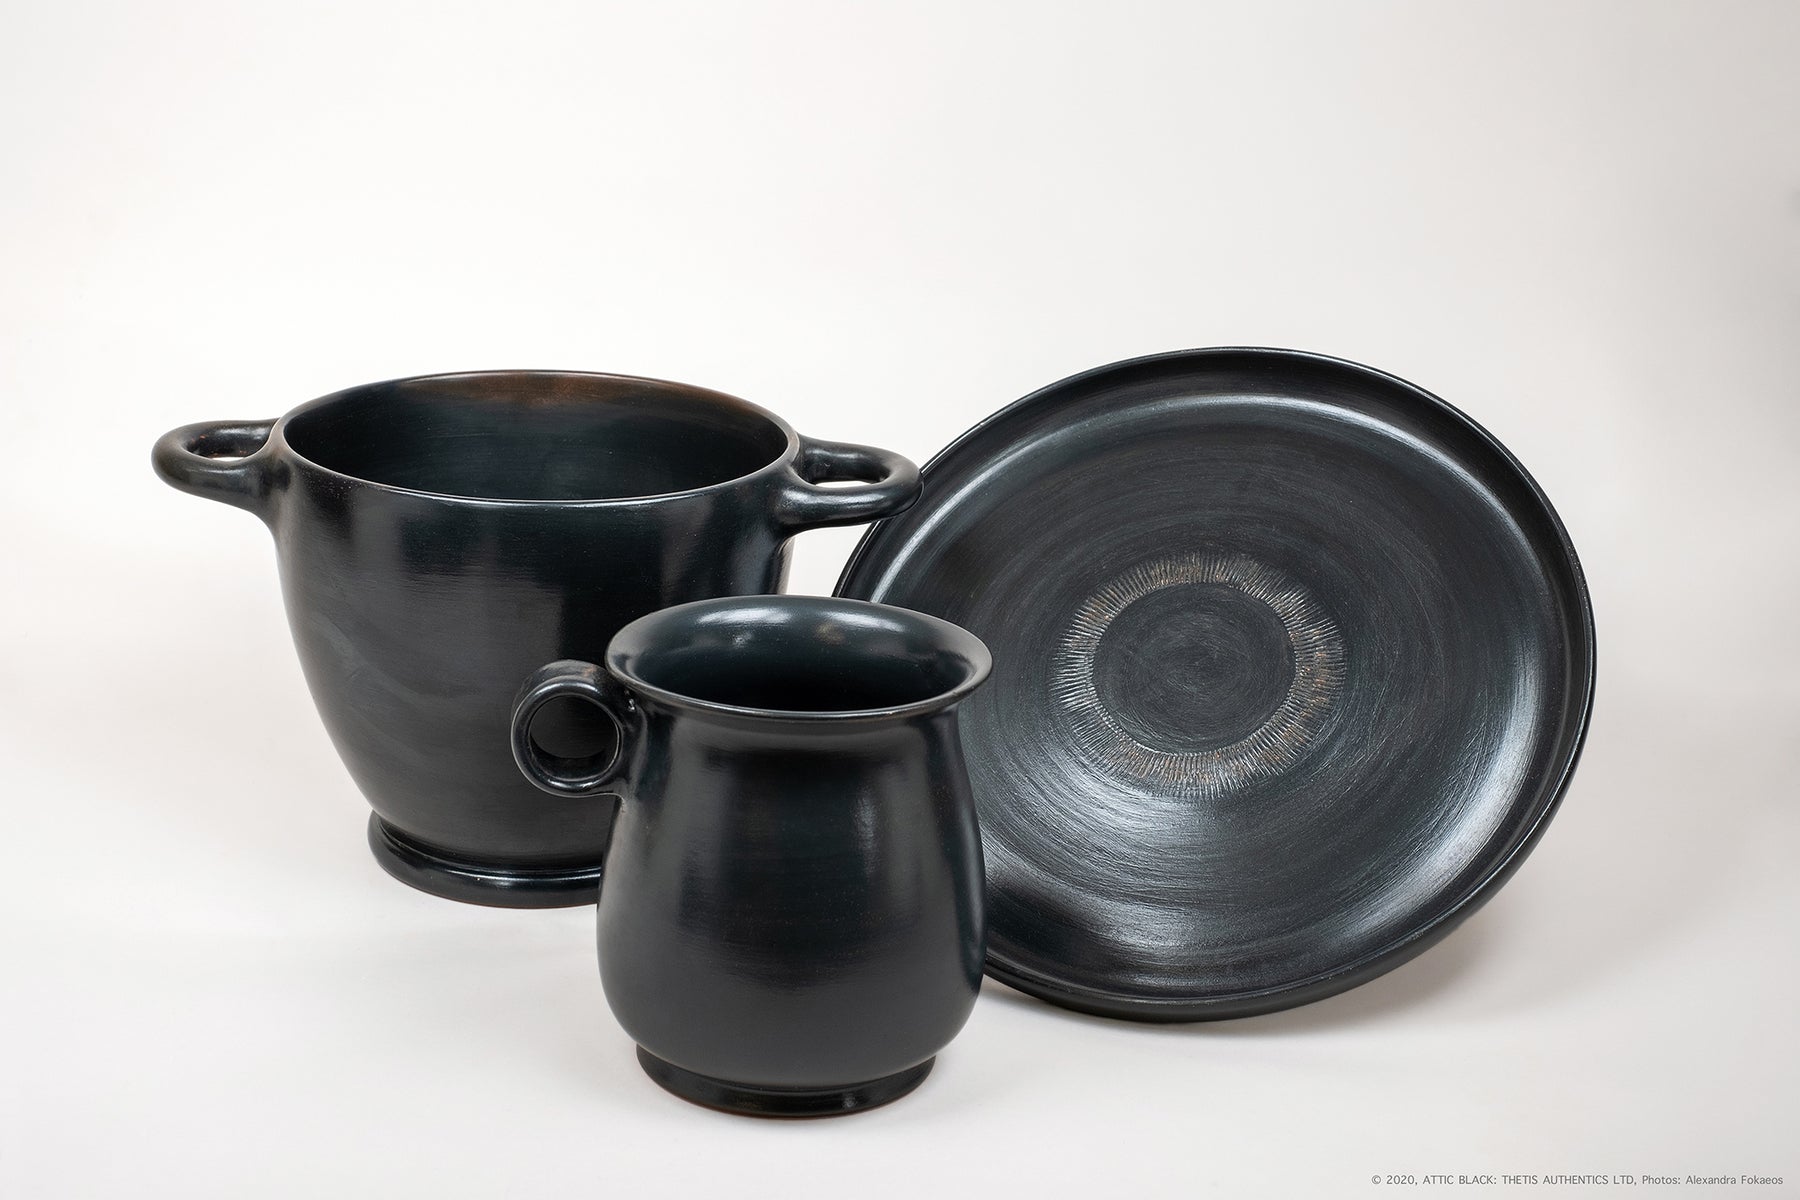 The types of Pottery in ancient Greece: transport and tableware